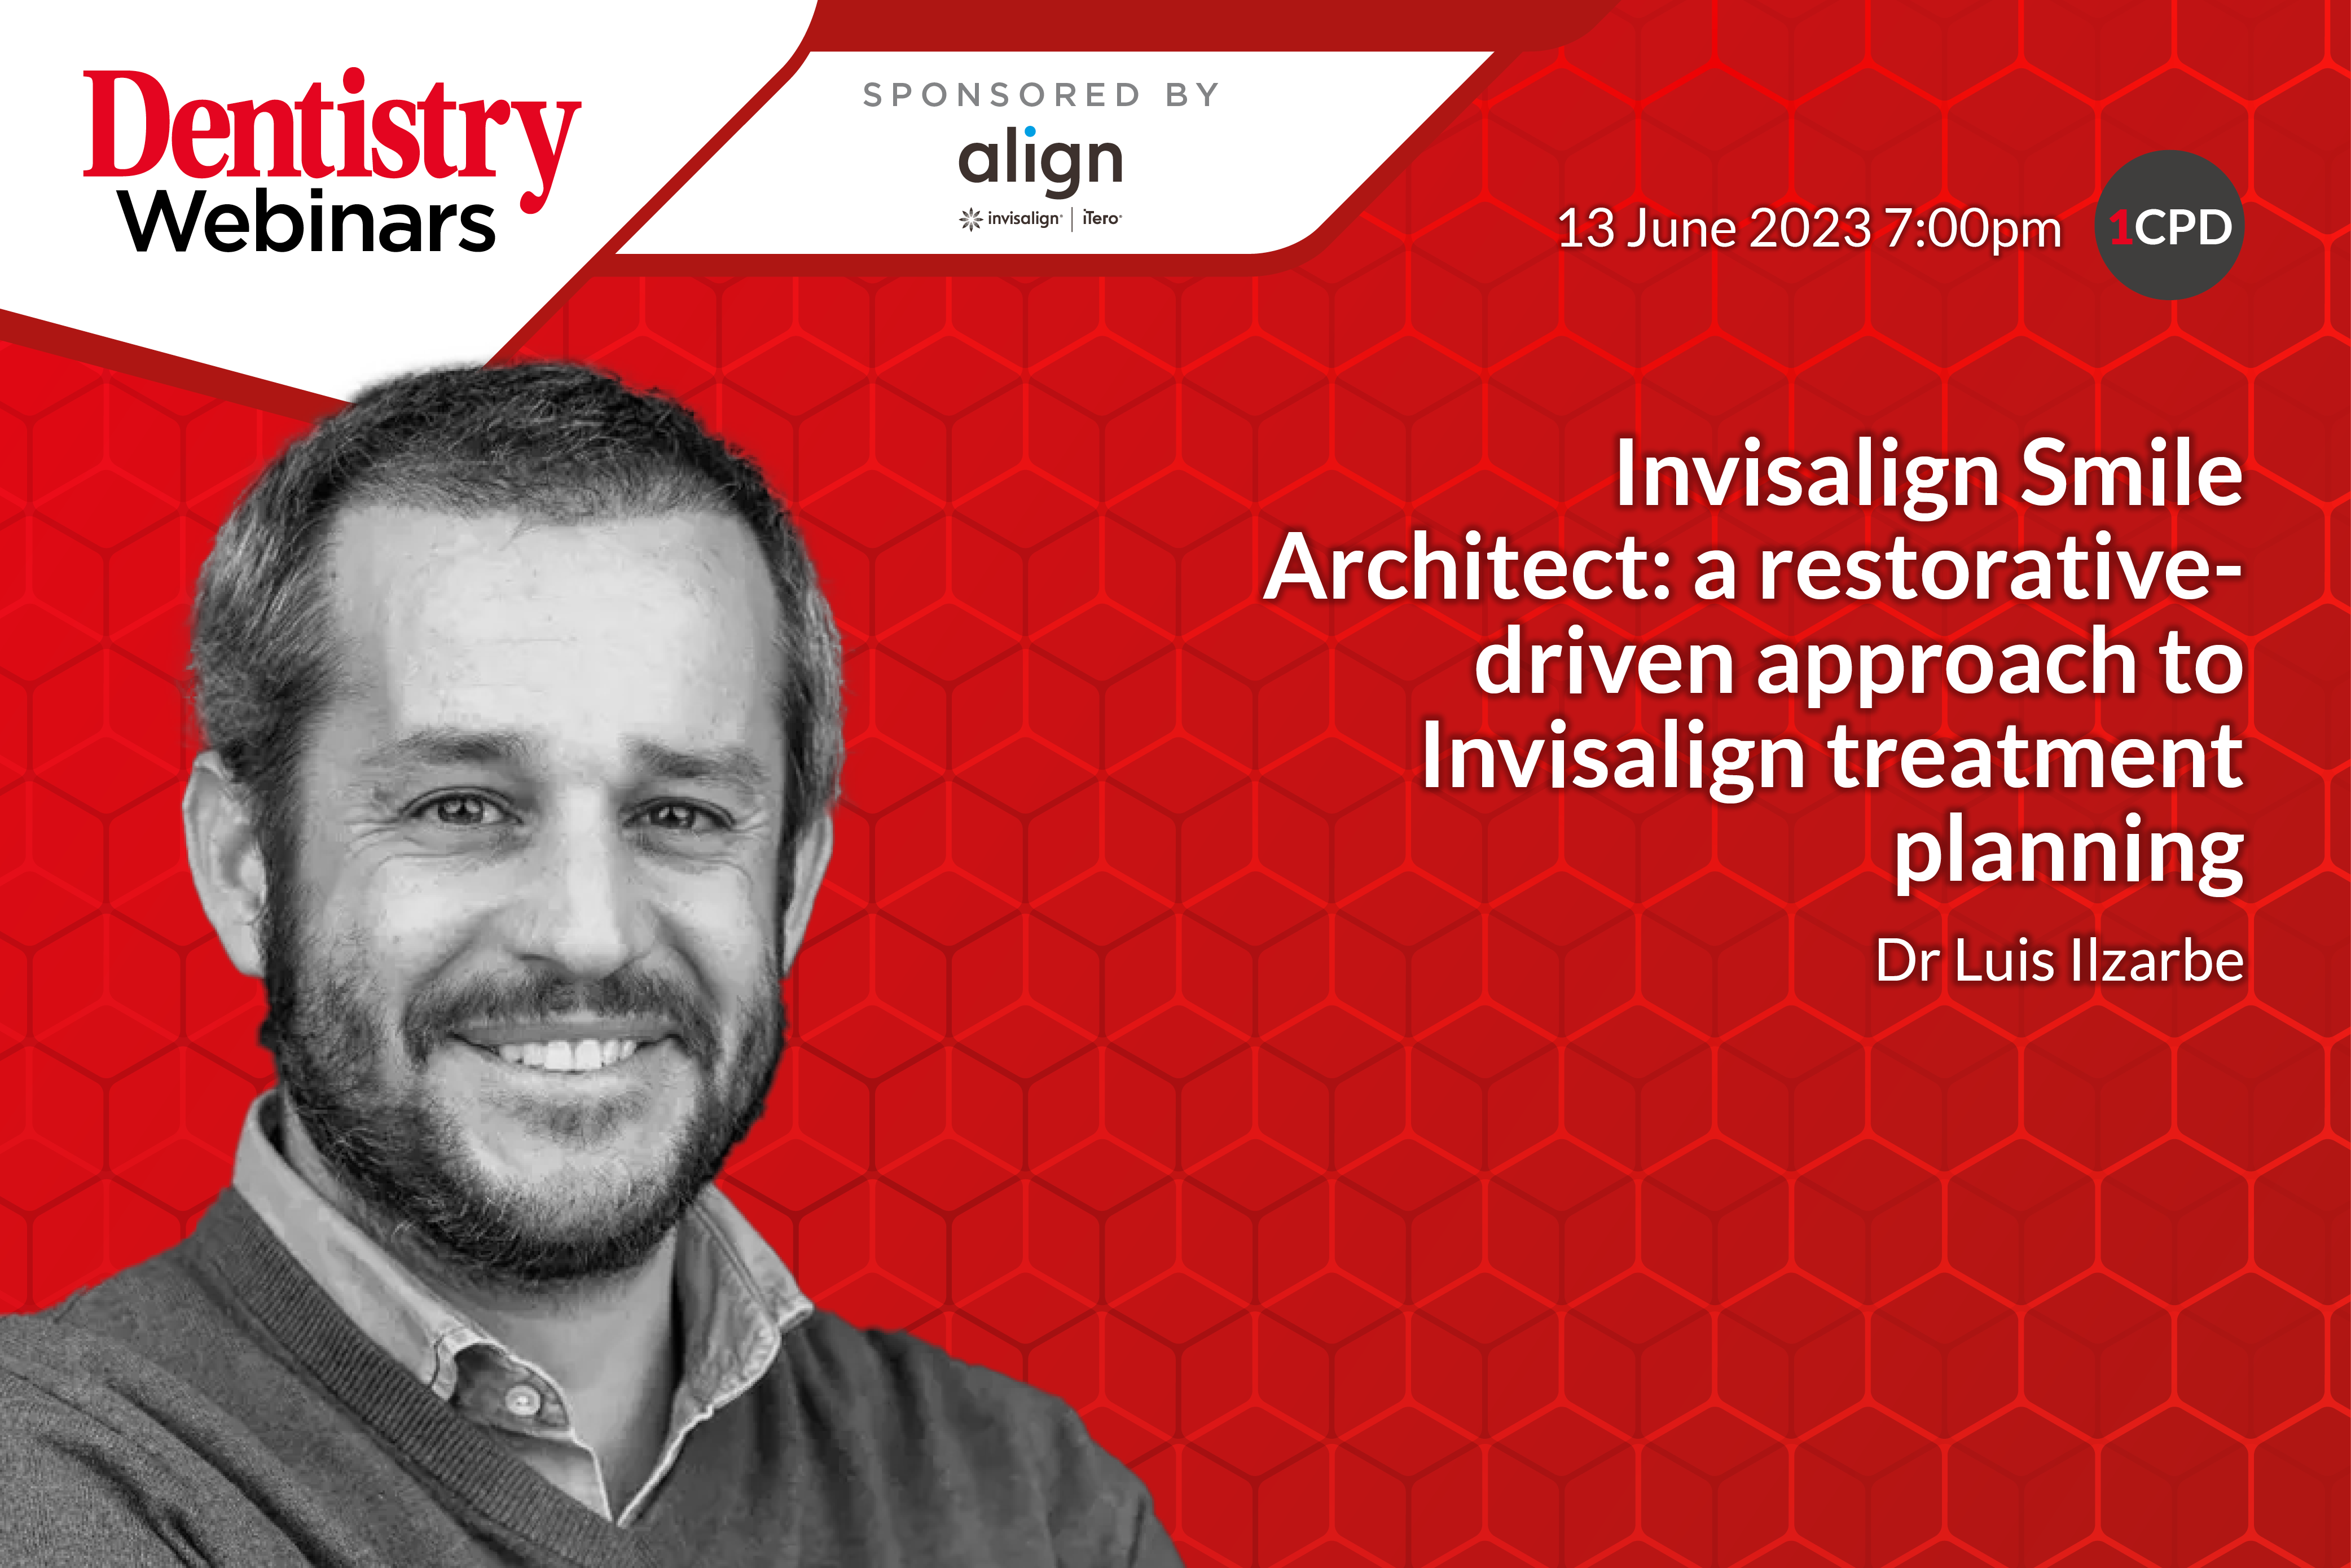 Join Dr Luis Ilzarbe on Tuesday 13 June at 7pm as he discusses Invisalign Smile Architect: a restorative approach to treatment planning.